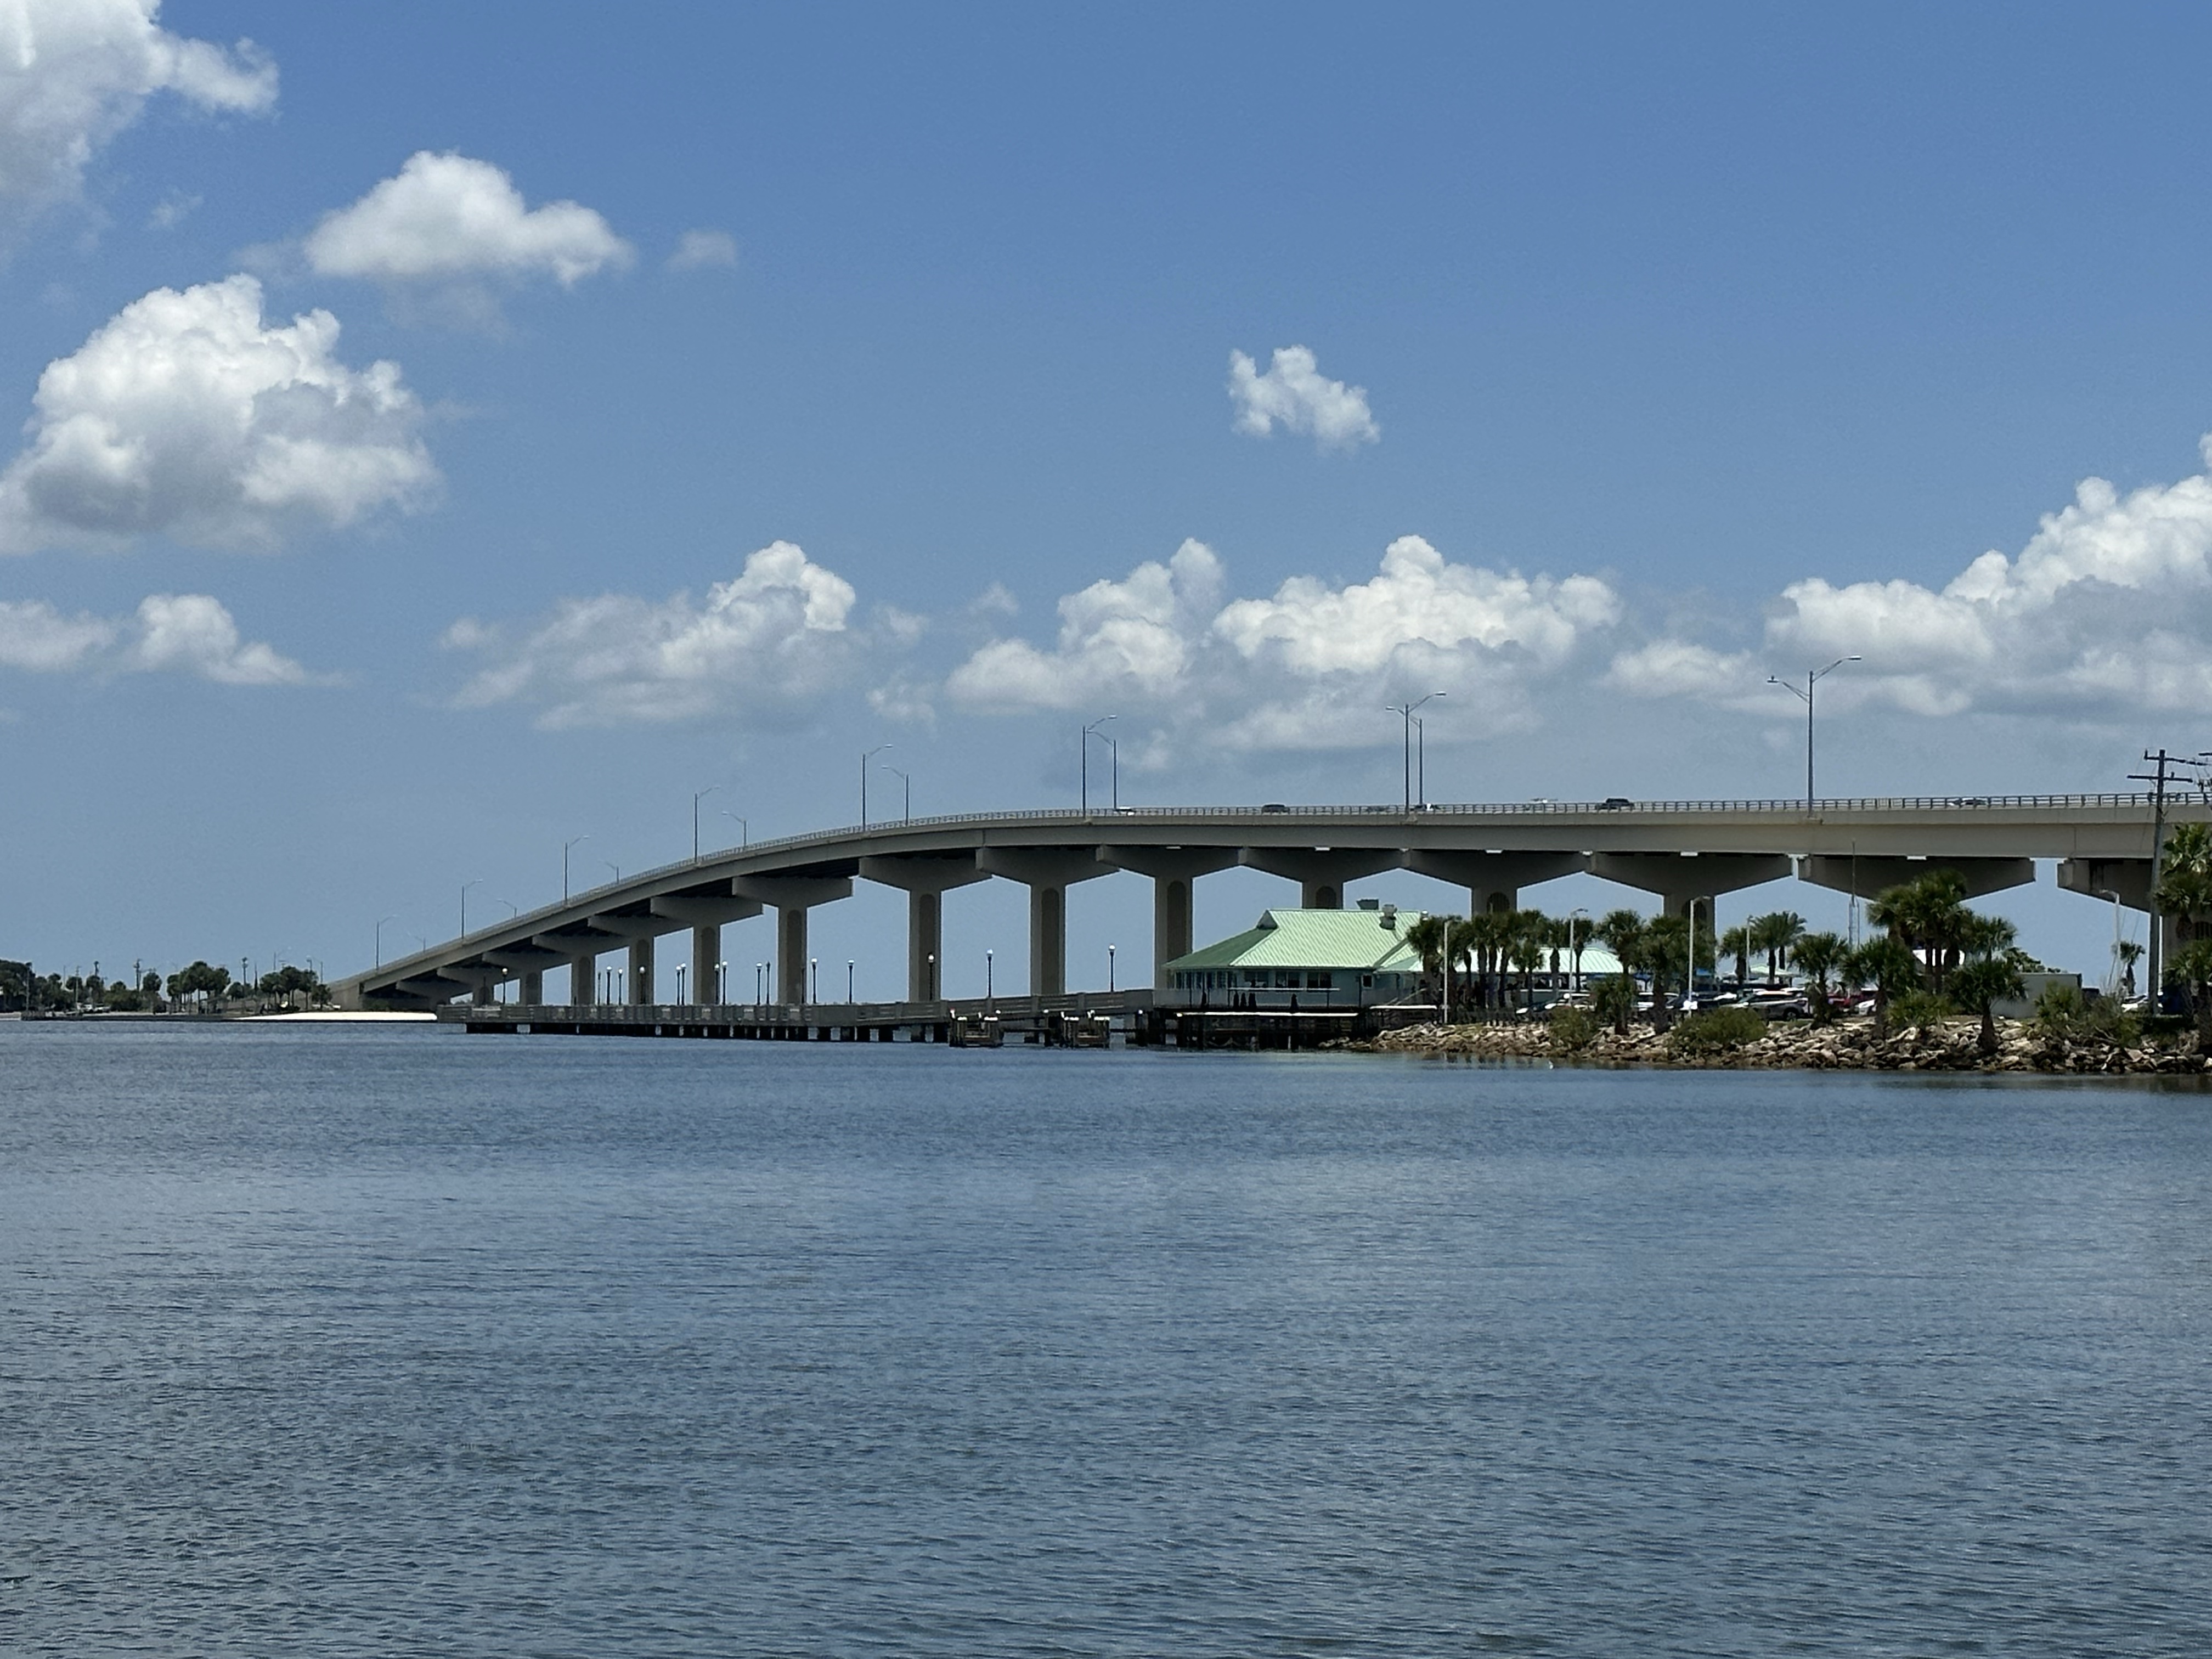 Titusville Named Most Affordable City in Florida, according to New Study